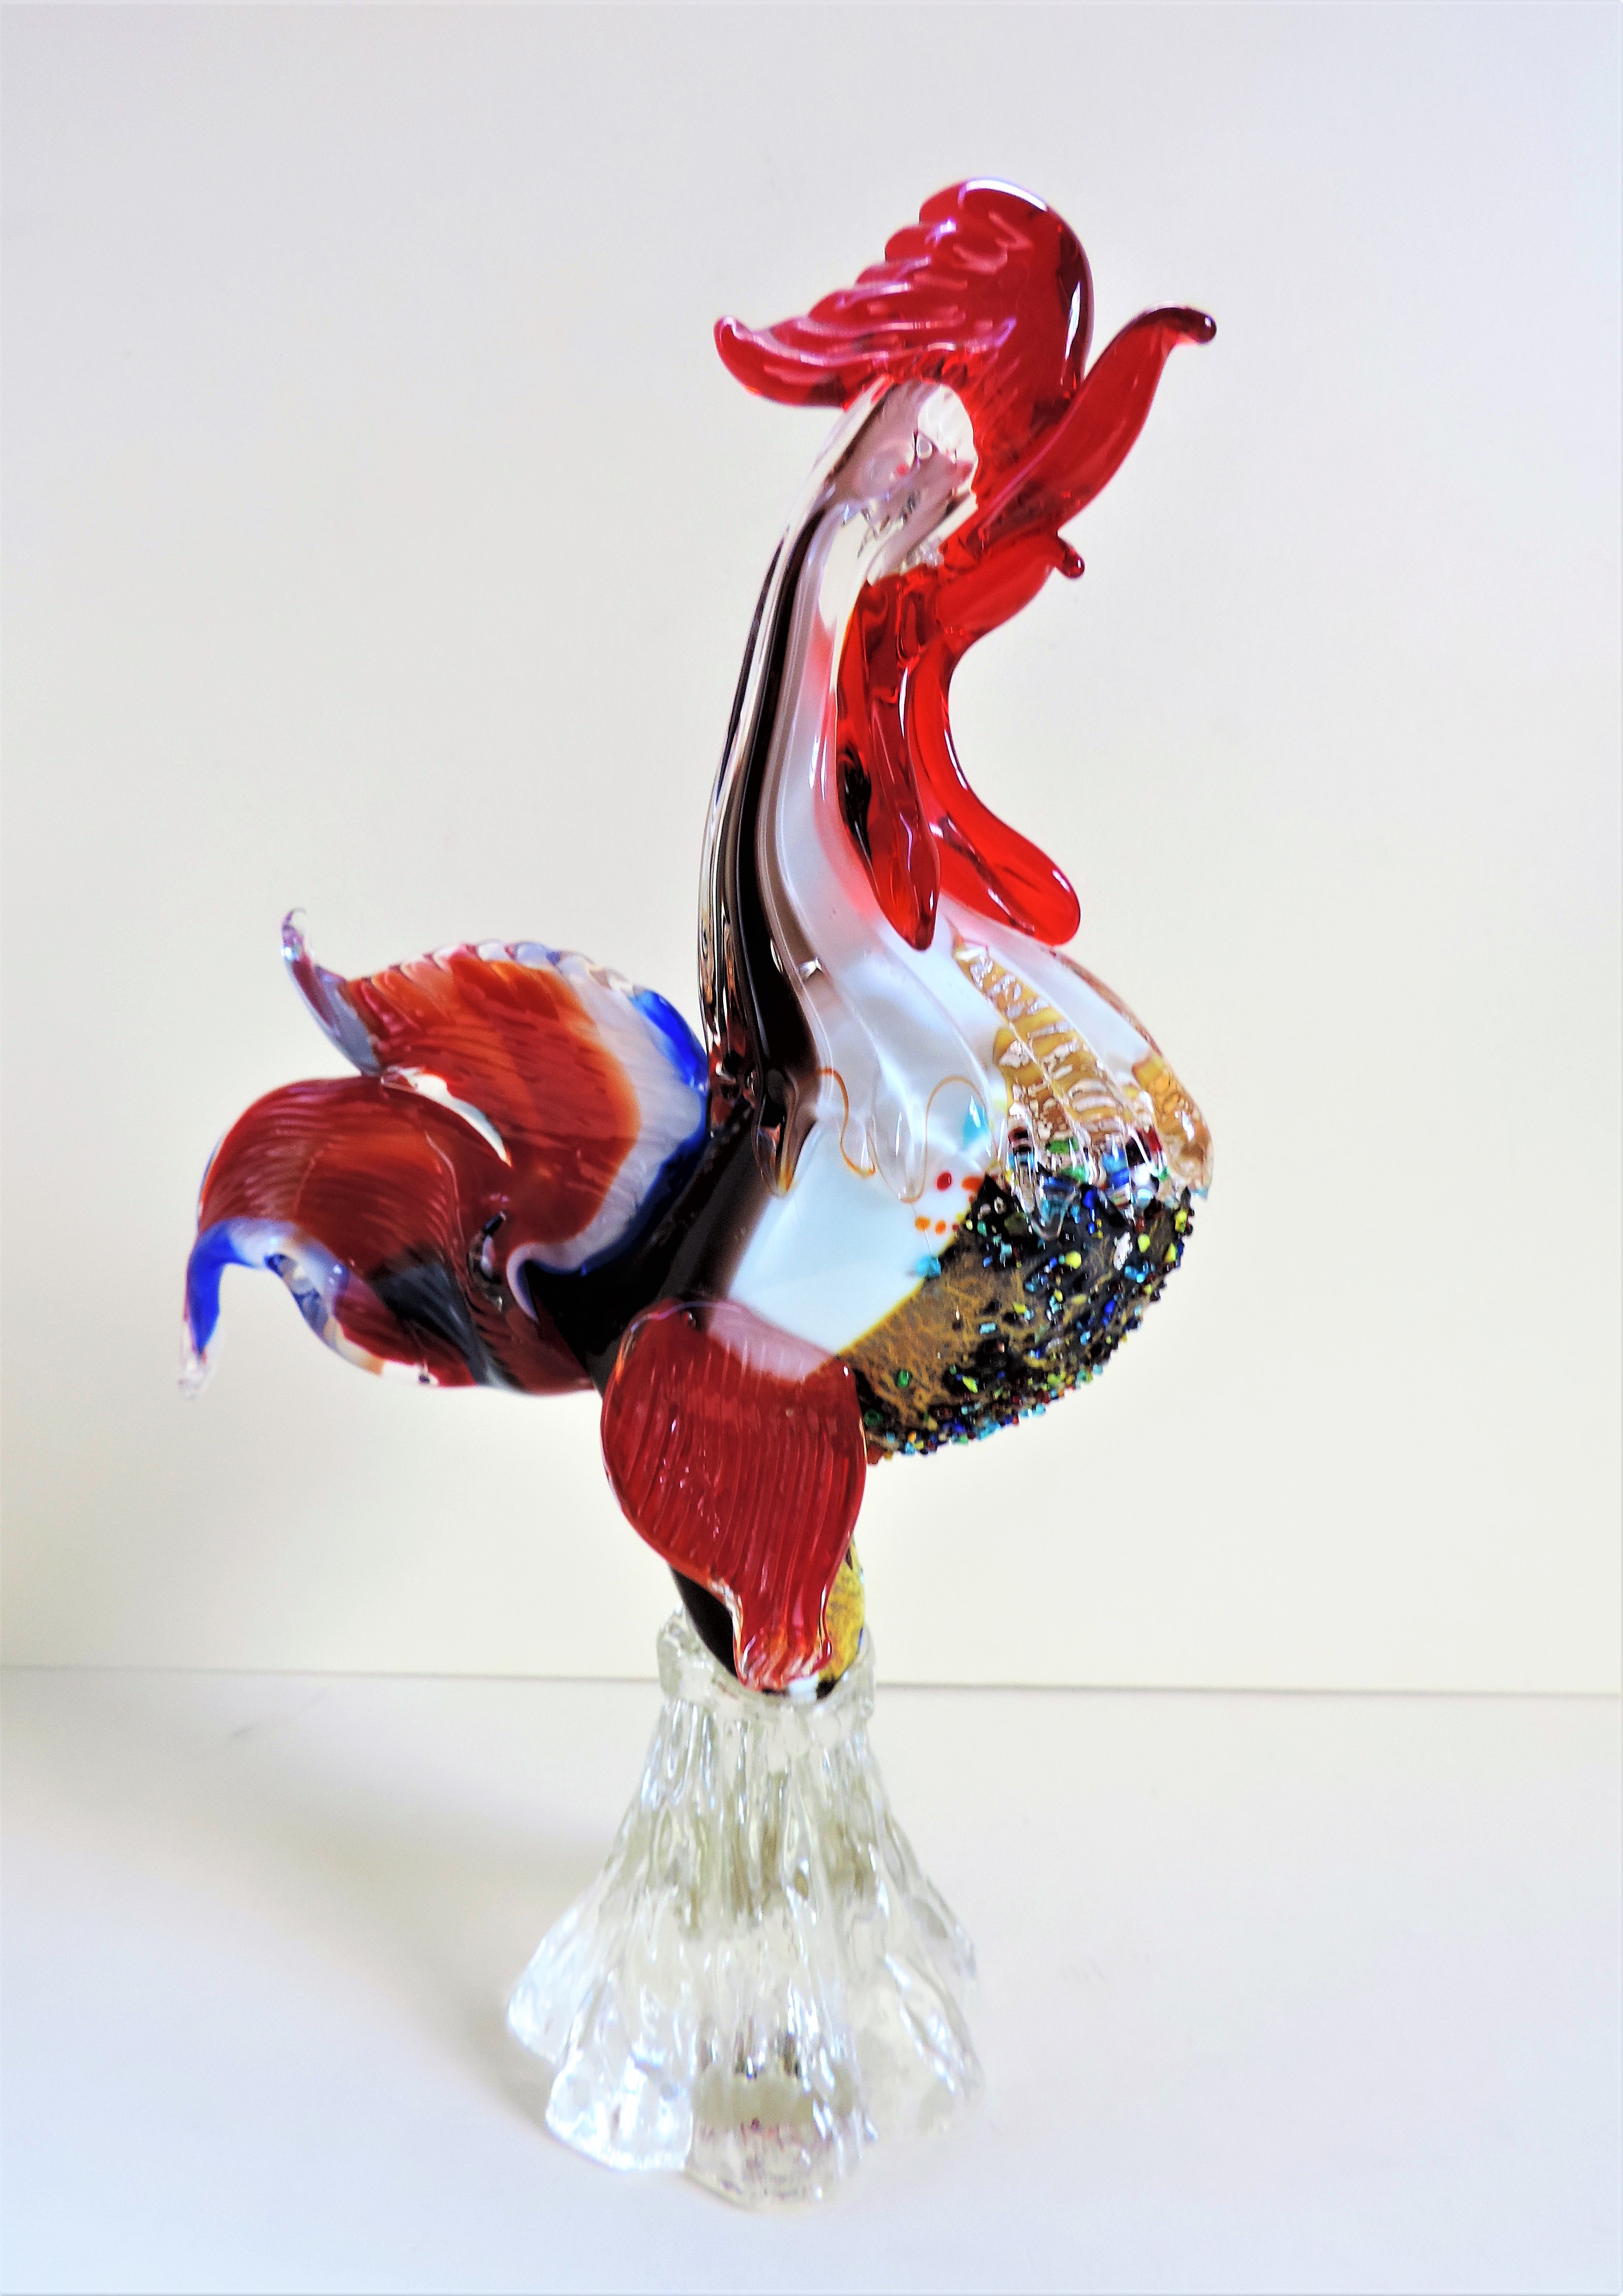 Large Vintage Murano Glass Rooster Sculpture 30cm Tall - Image 2 of 7